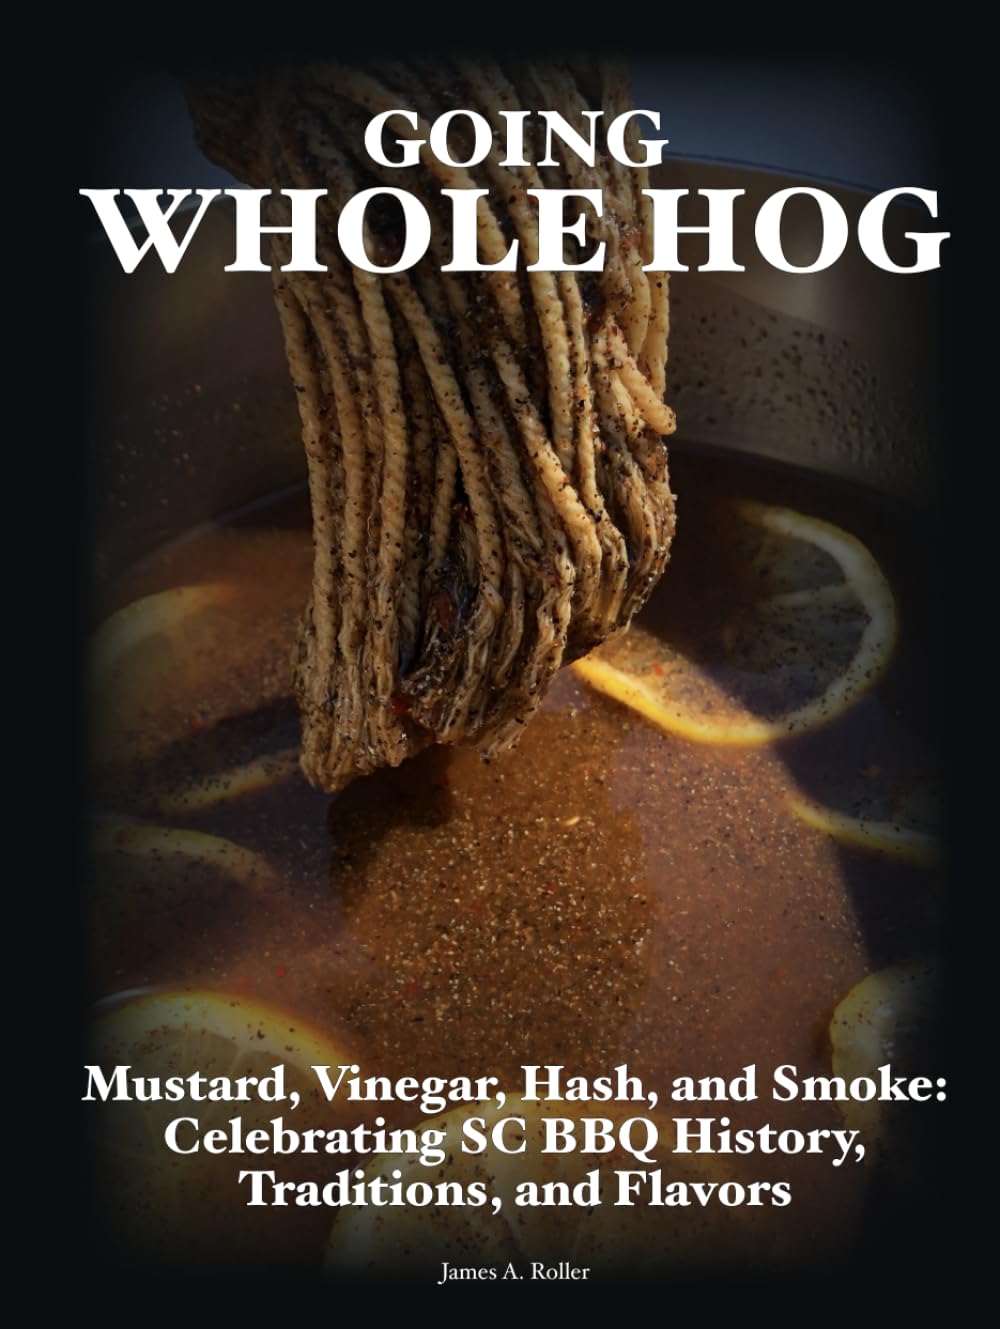 Going Whole Hog: Mustard, Vinegar, Hash, and Smoke: Celebrating SC BBQ History, Traditions, and Flavors